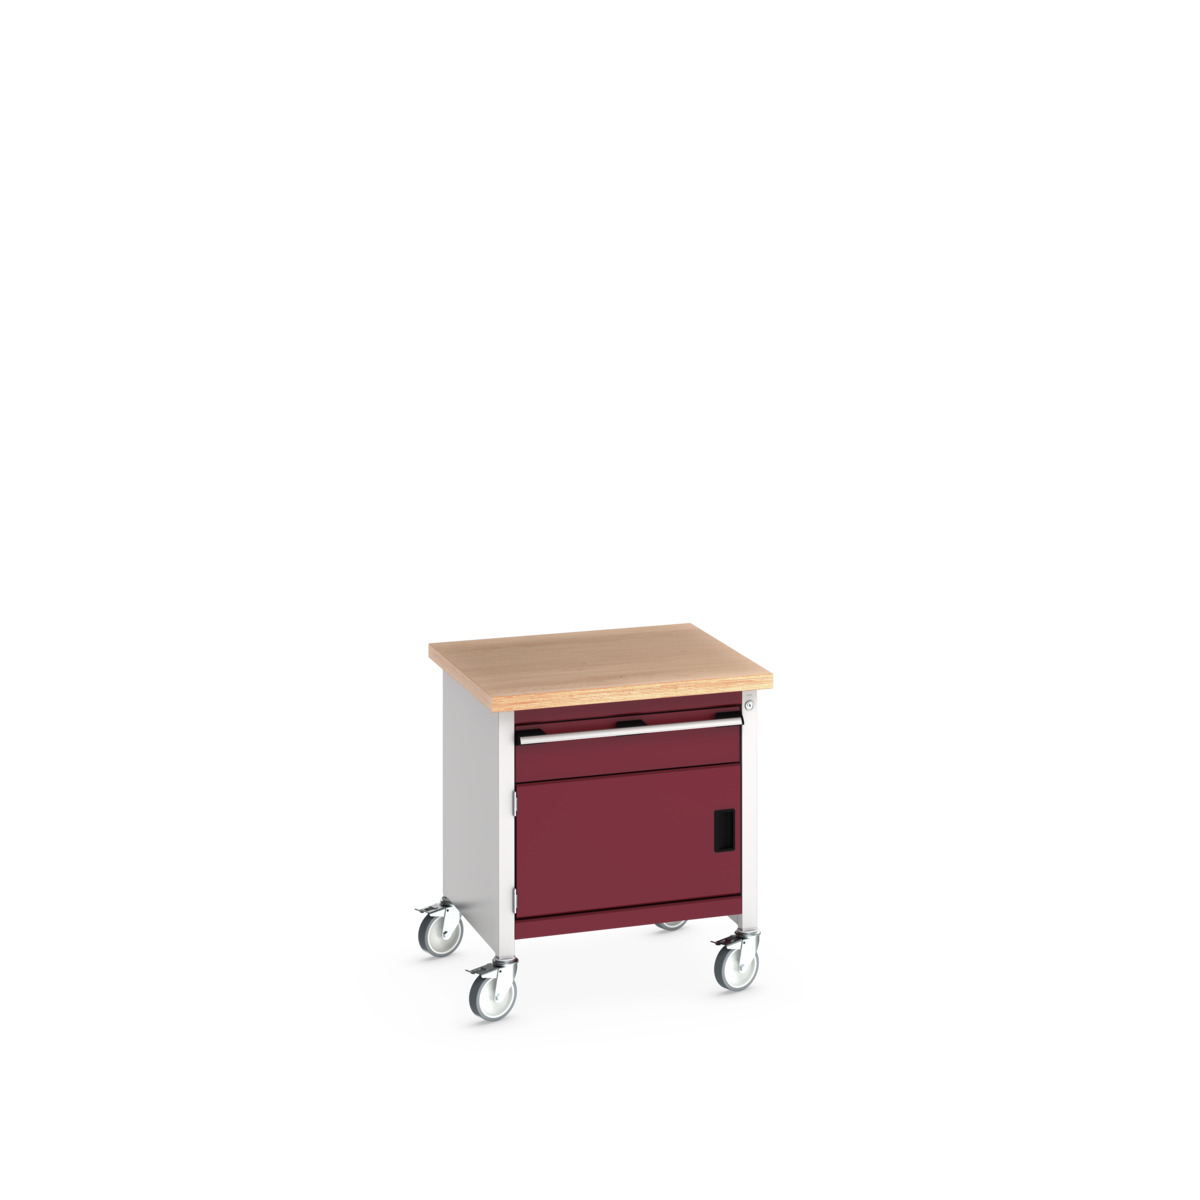 41002088.24V - cubio mobile storage bench (mpx)